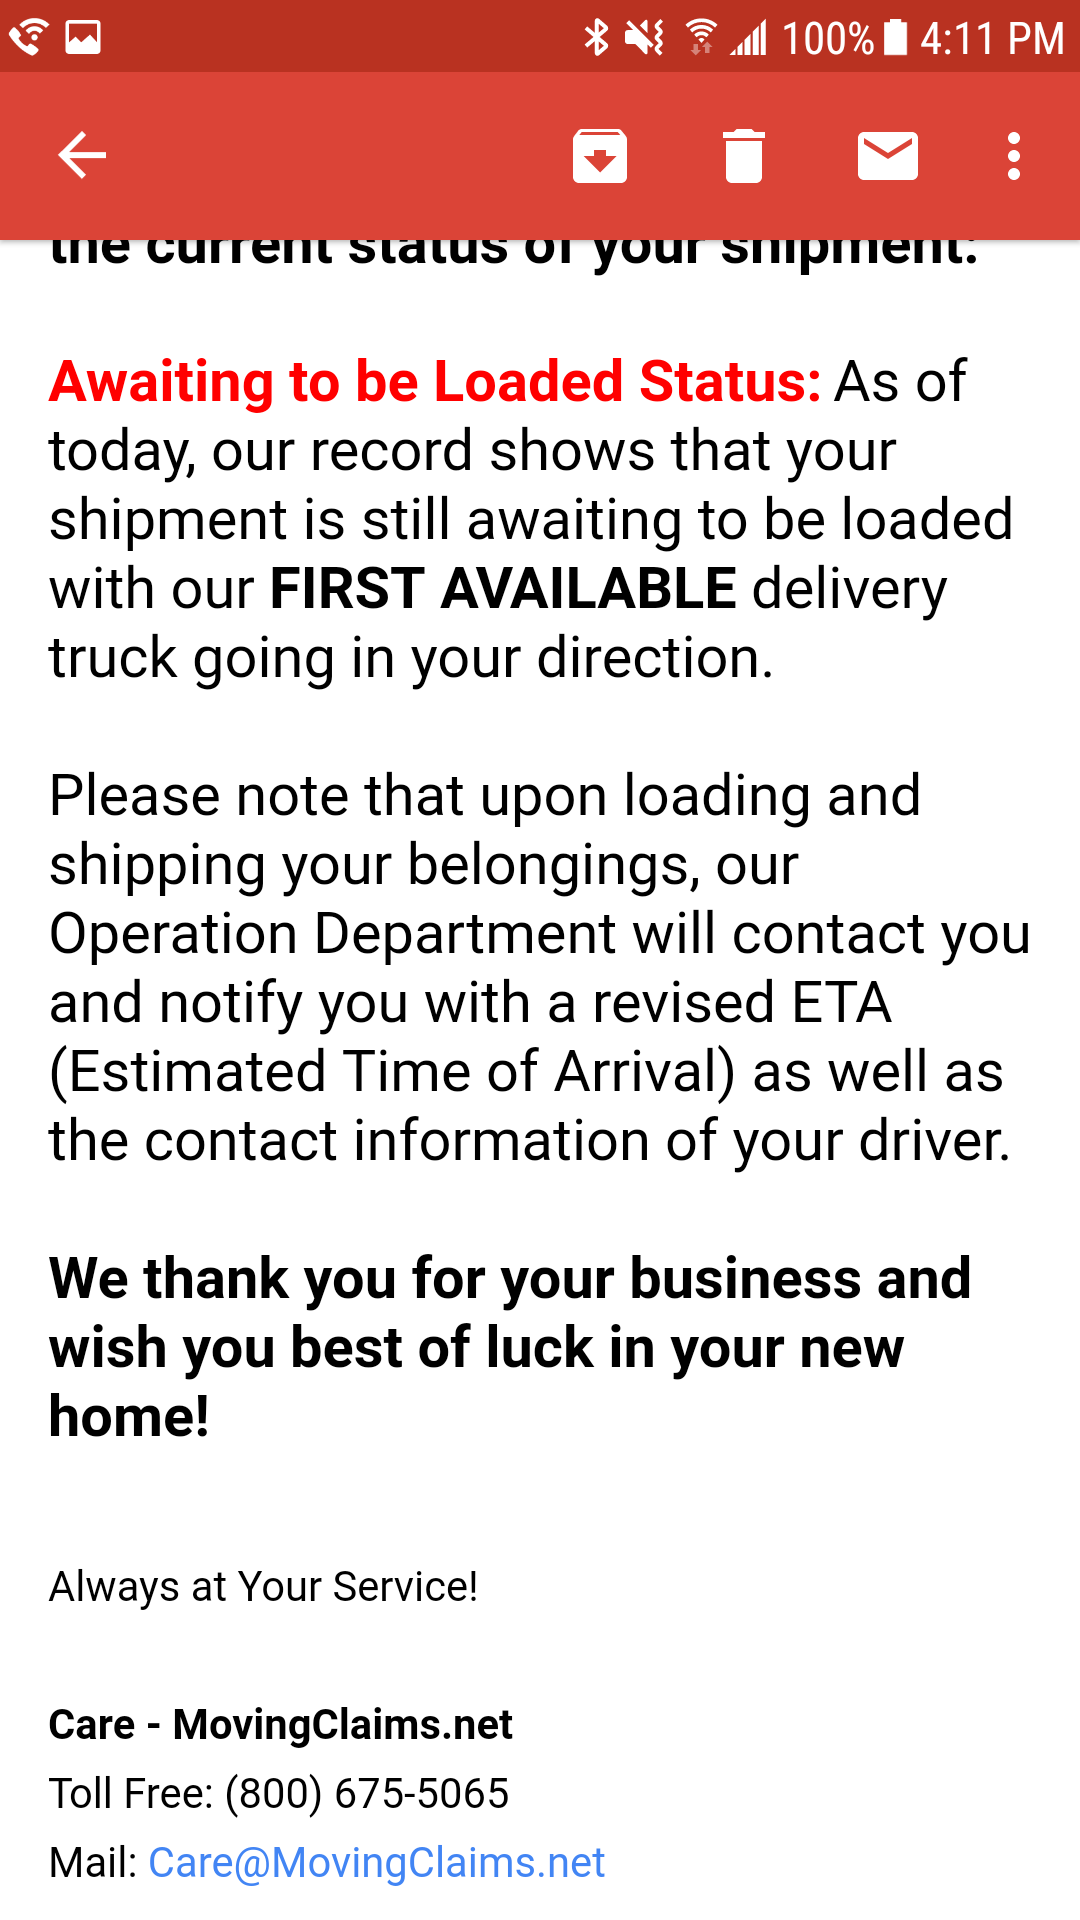 Continued email of status showing not in transit